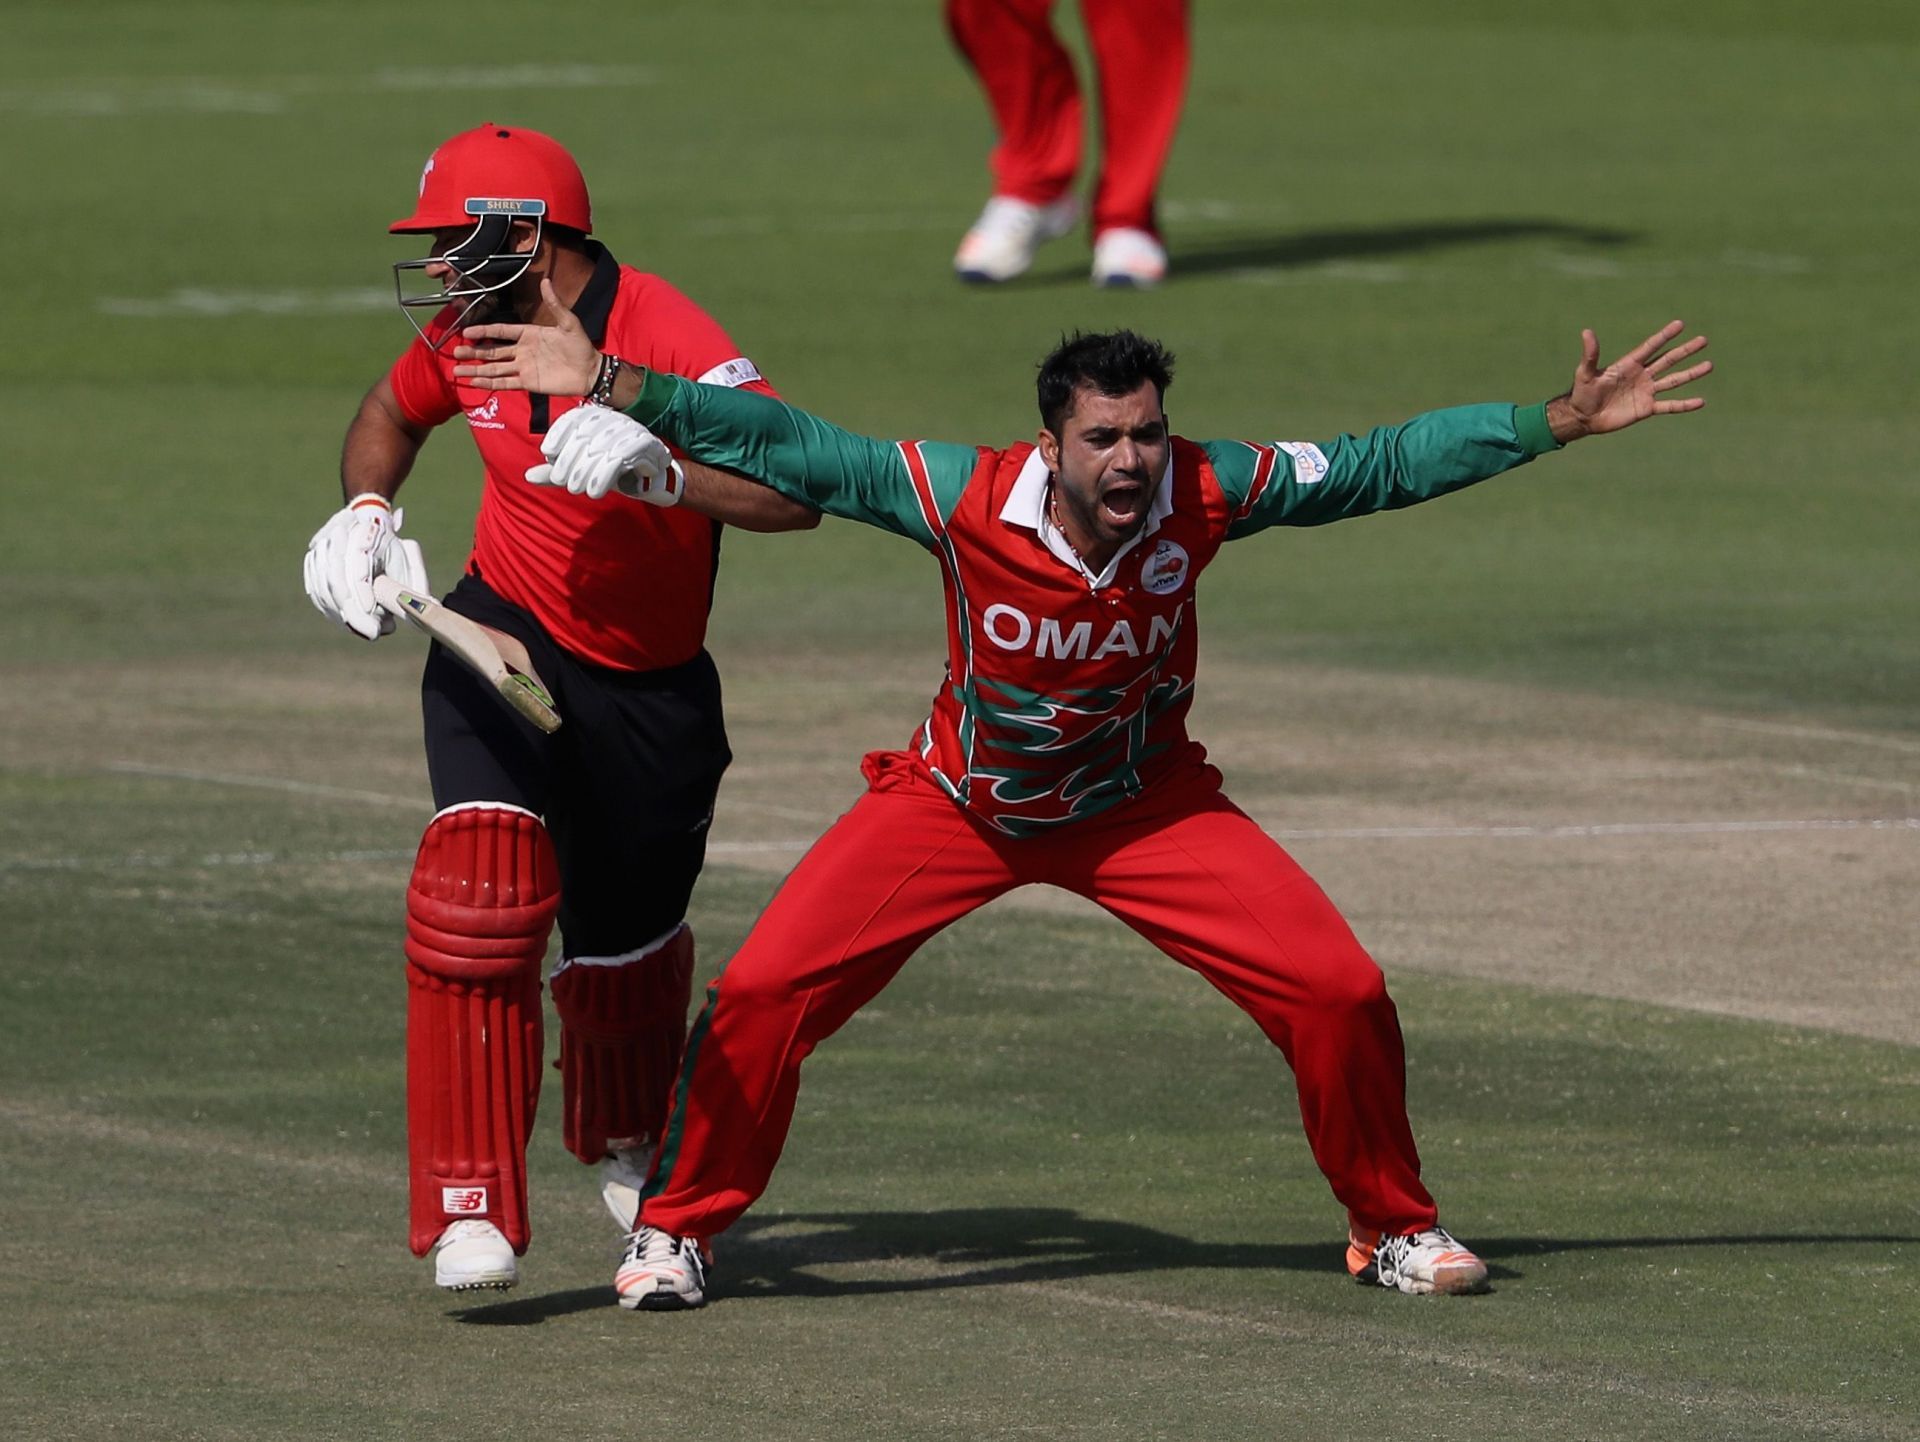 Bilal Khan has been brilliant with the ball for Oman